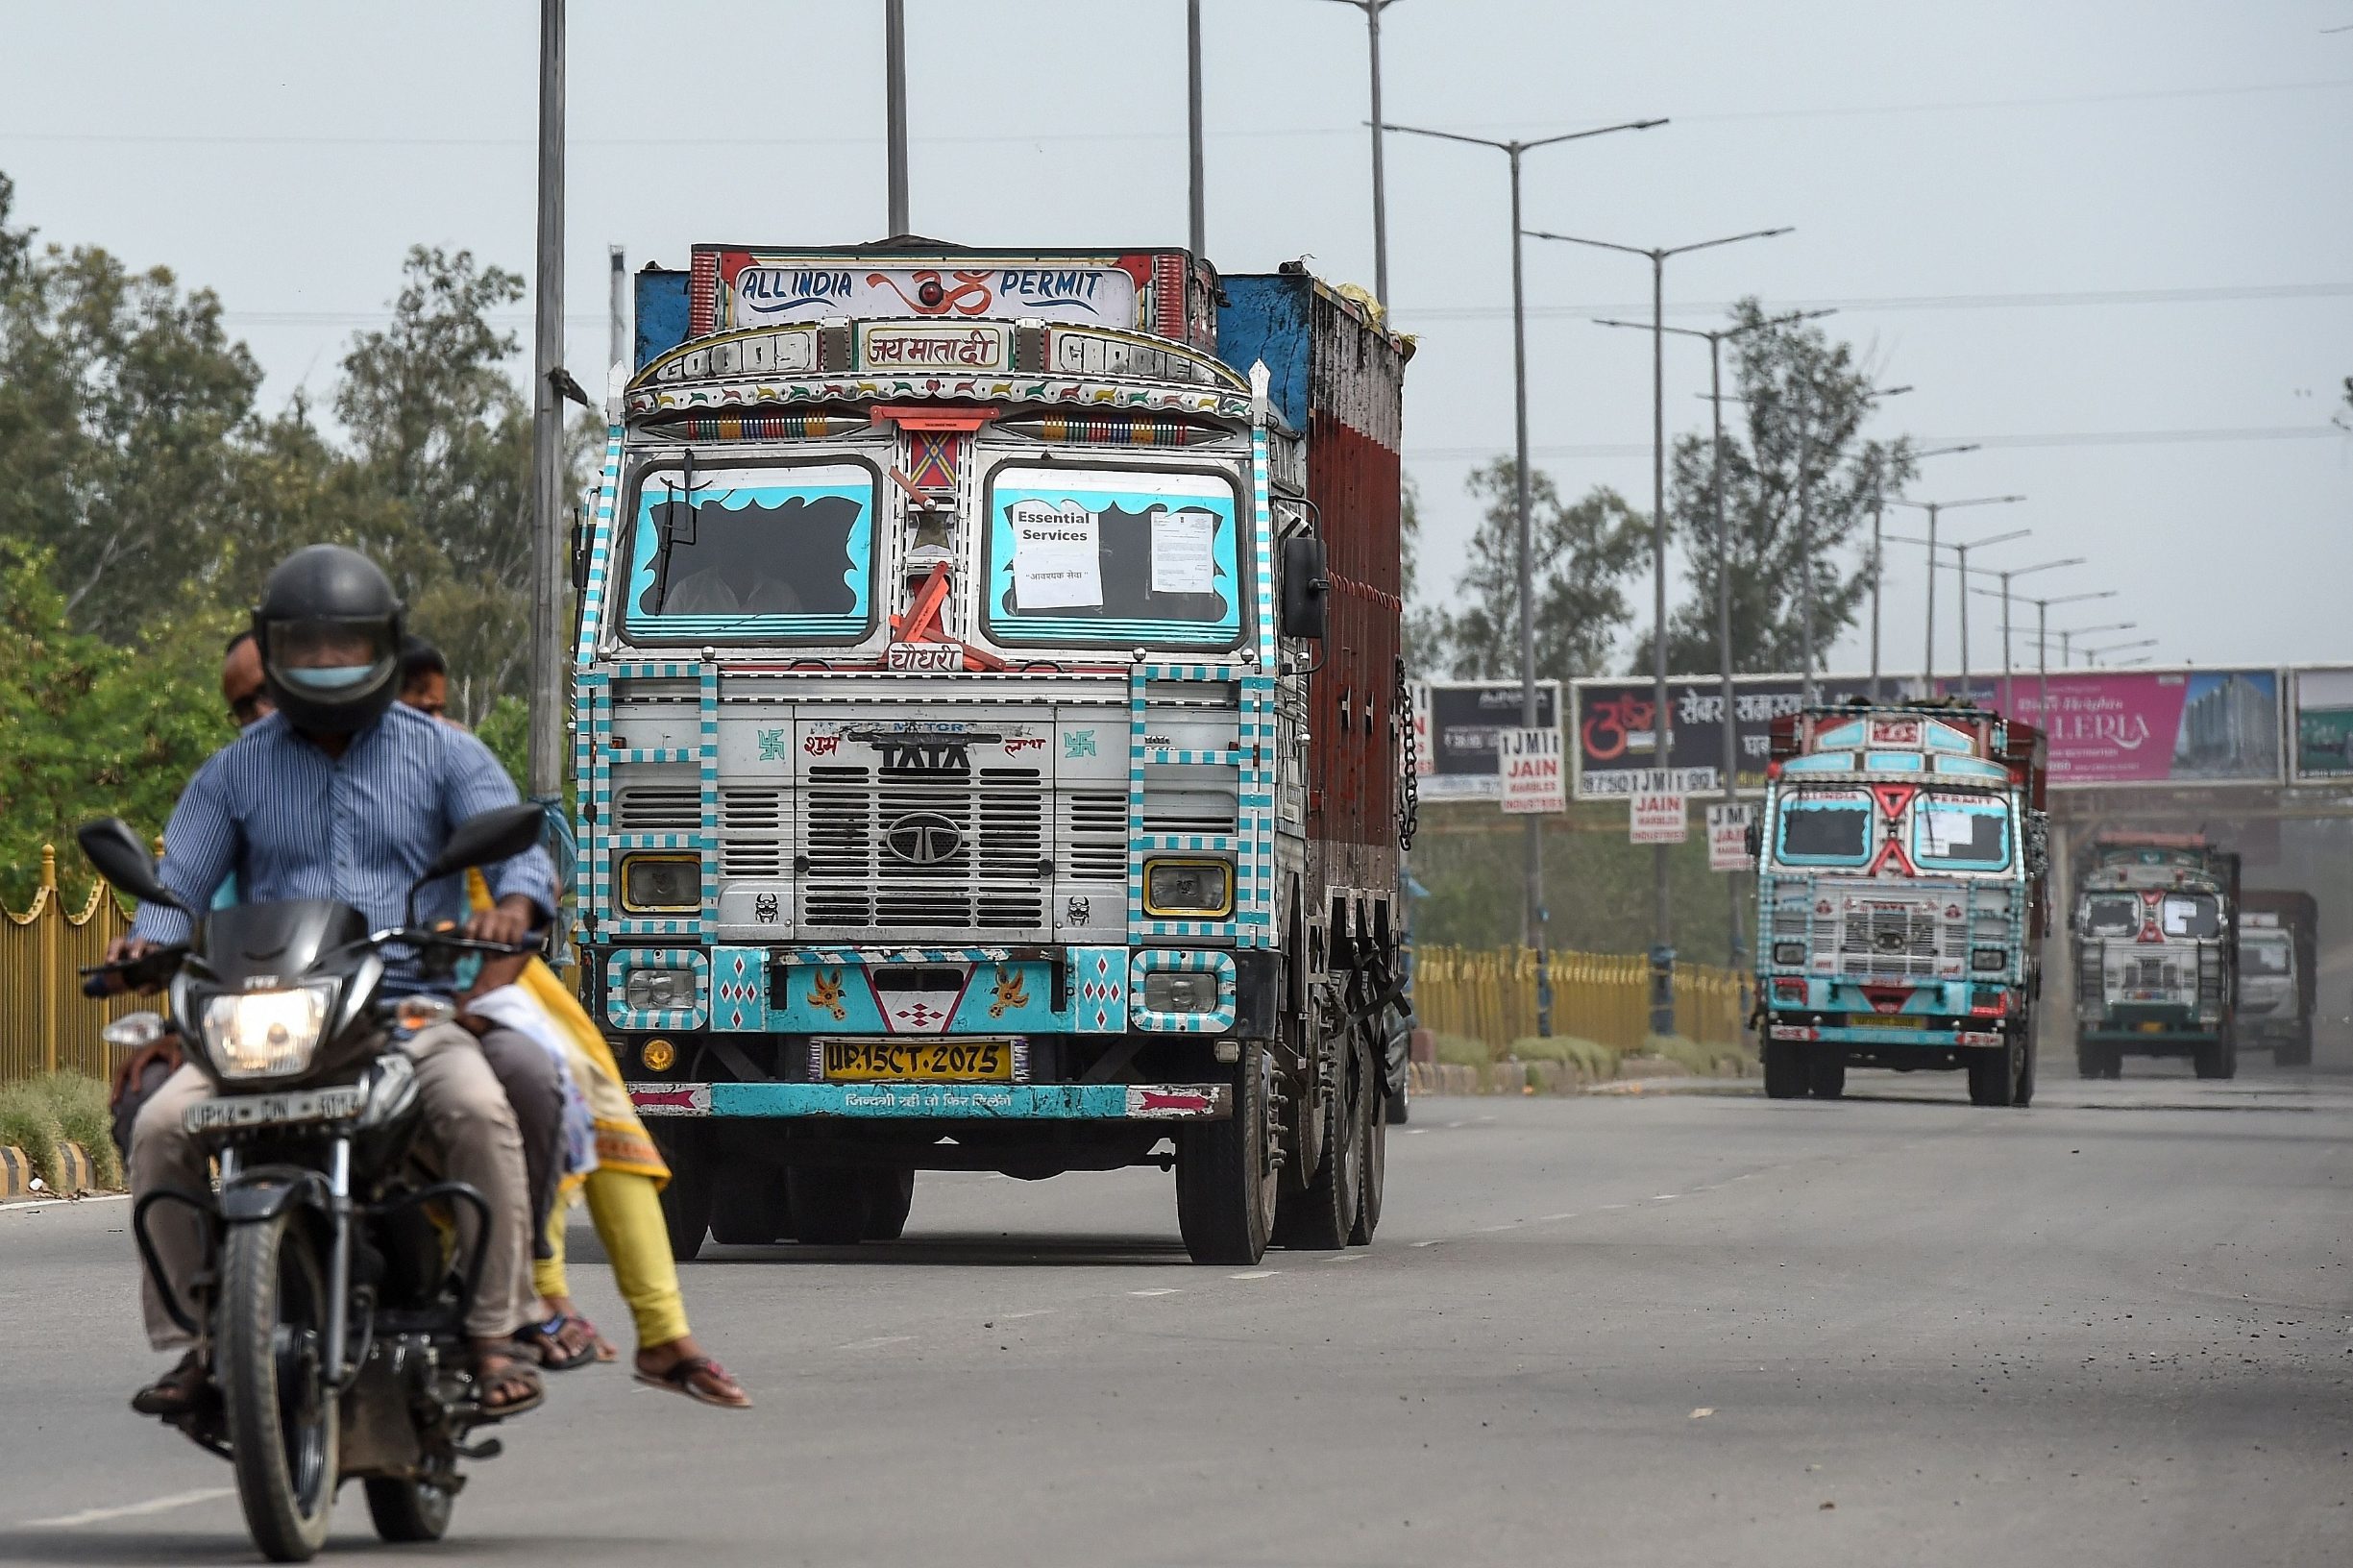 Trucks carrying food and essential commodities drive on a national highway during a government-imposed nationwide lockdown as a preventive measure against the COVID-19 coronavirus in Ghaziabad in Uttar Pradesh state on March 26, 2020. (Photo by Prakash SINGH / AFP)